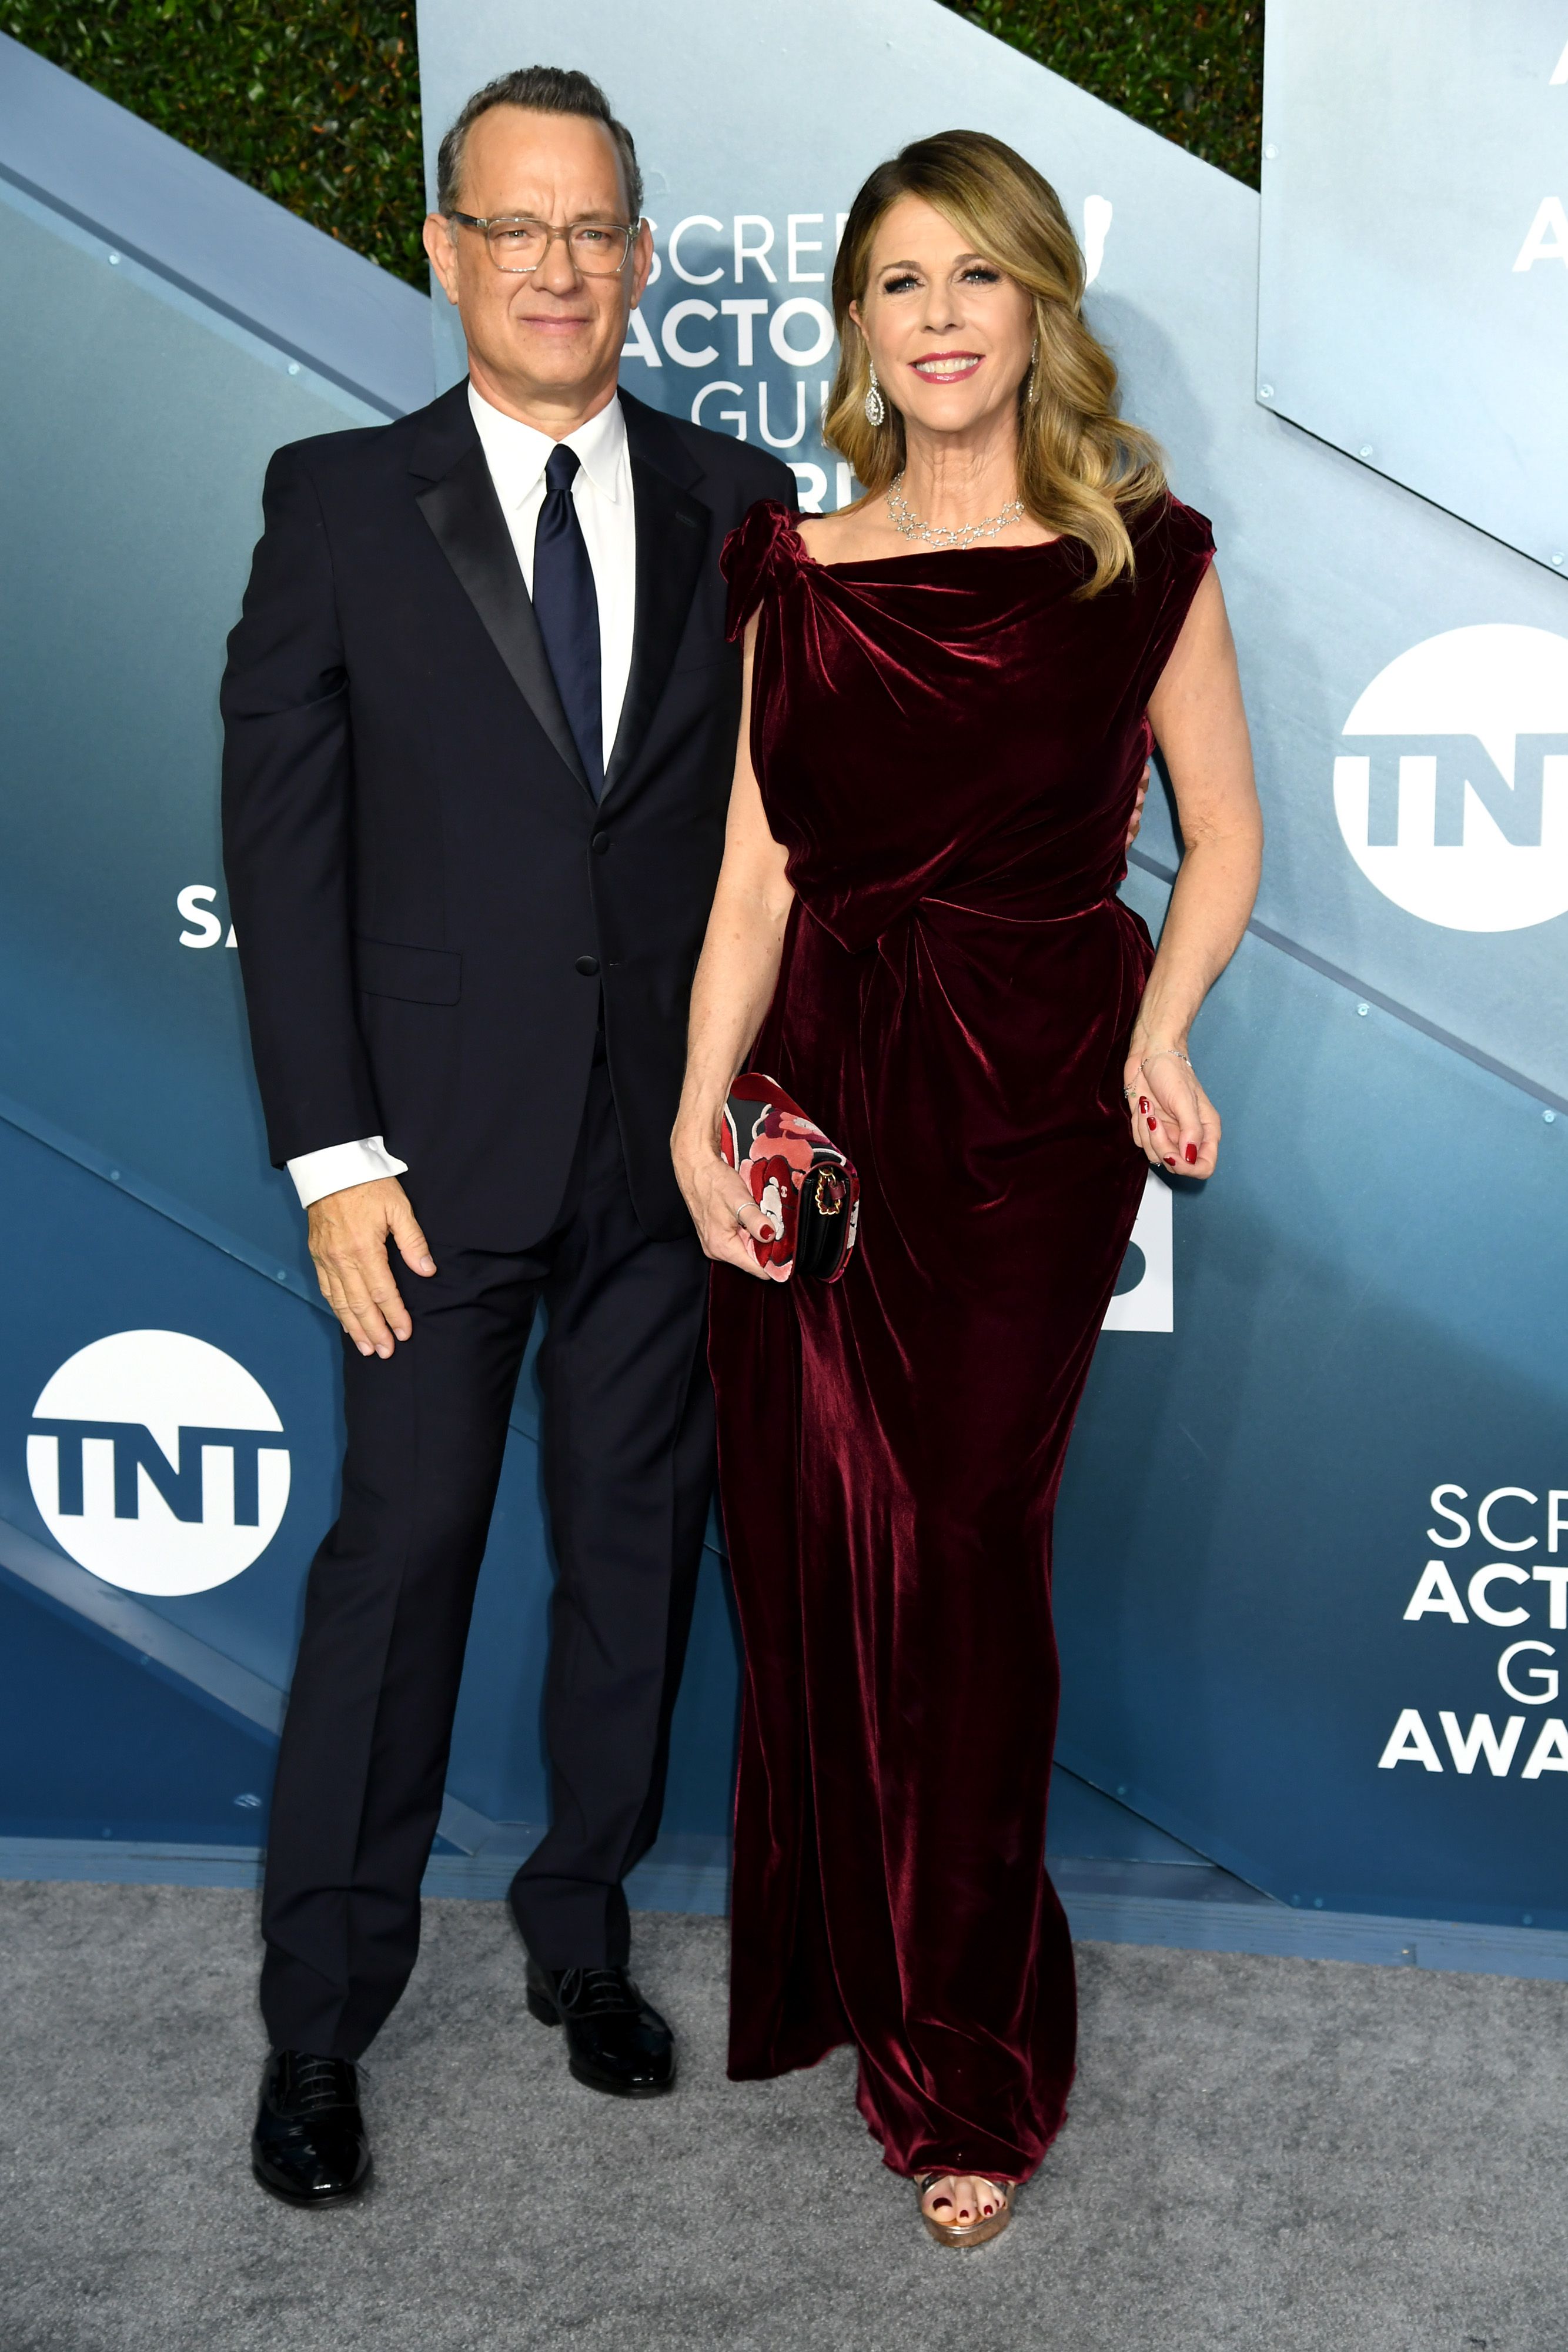 Tom Hanks and Rita Wilson during the 26th Annual Screen Actors Guild Awards at The Shrine Auditorium on January 19, 2020 in Los Angeles, California. | Source: Getty Images